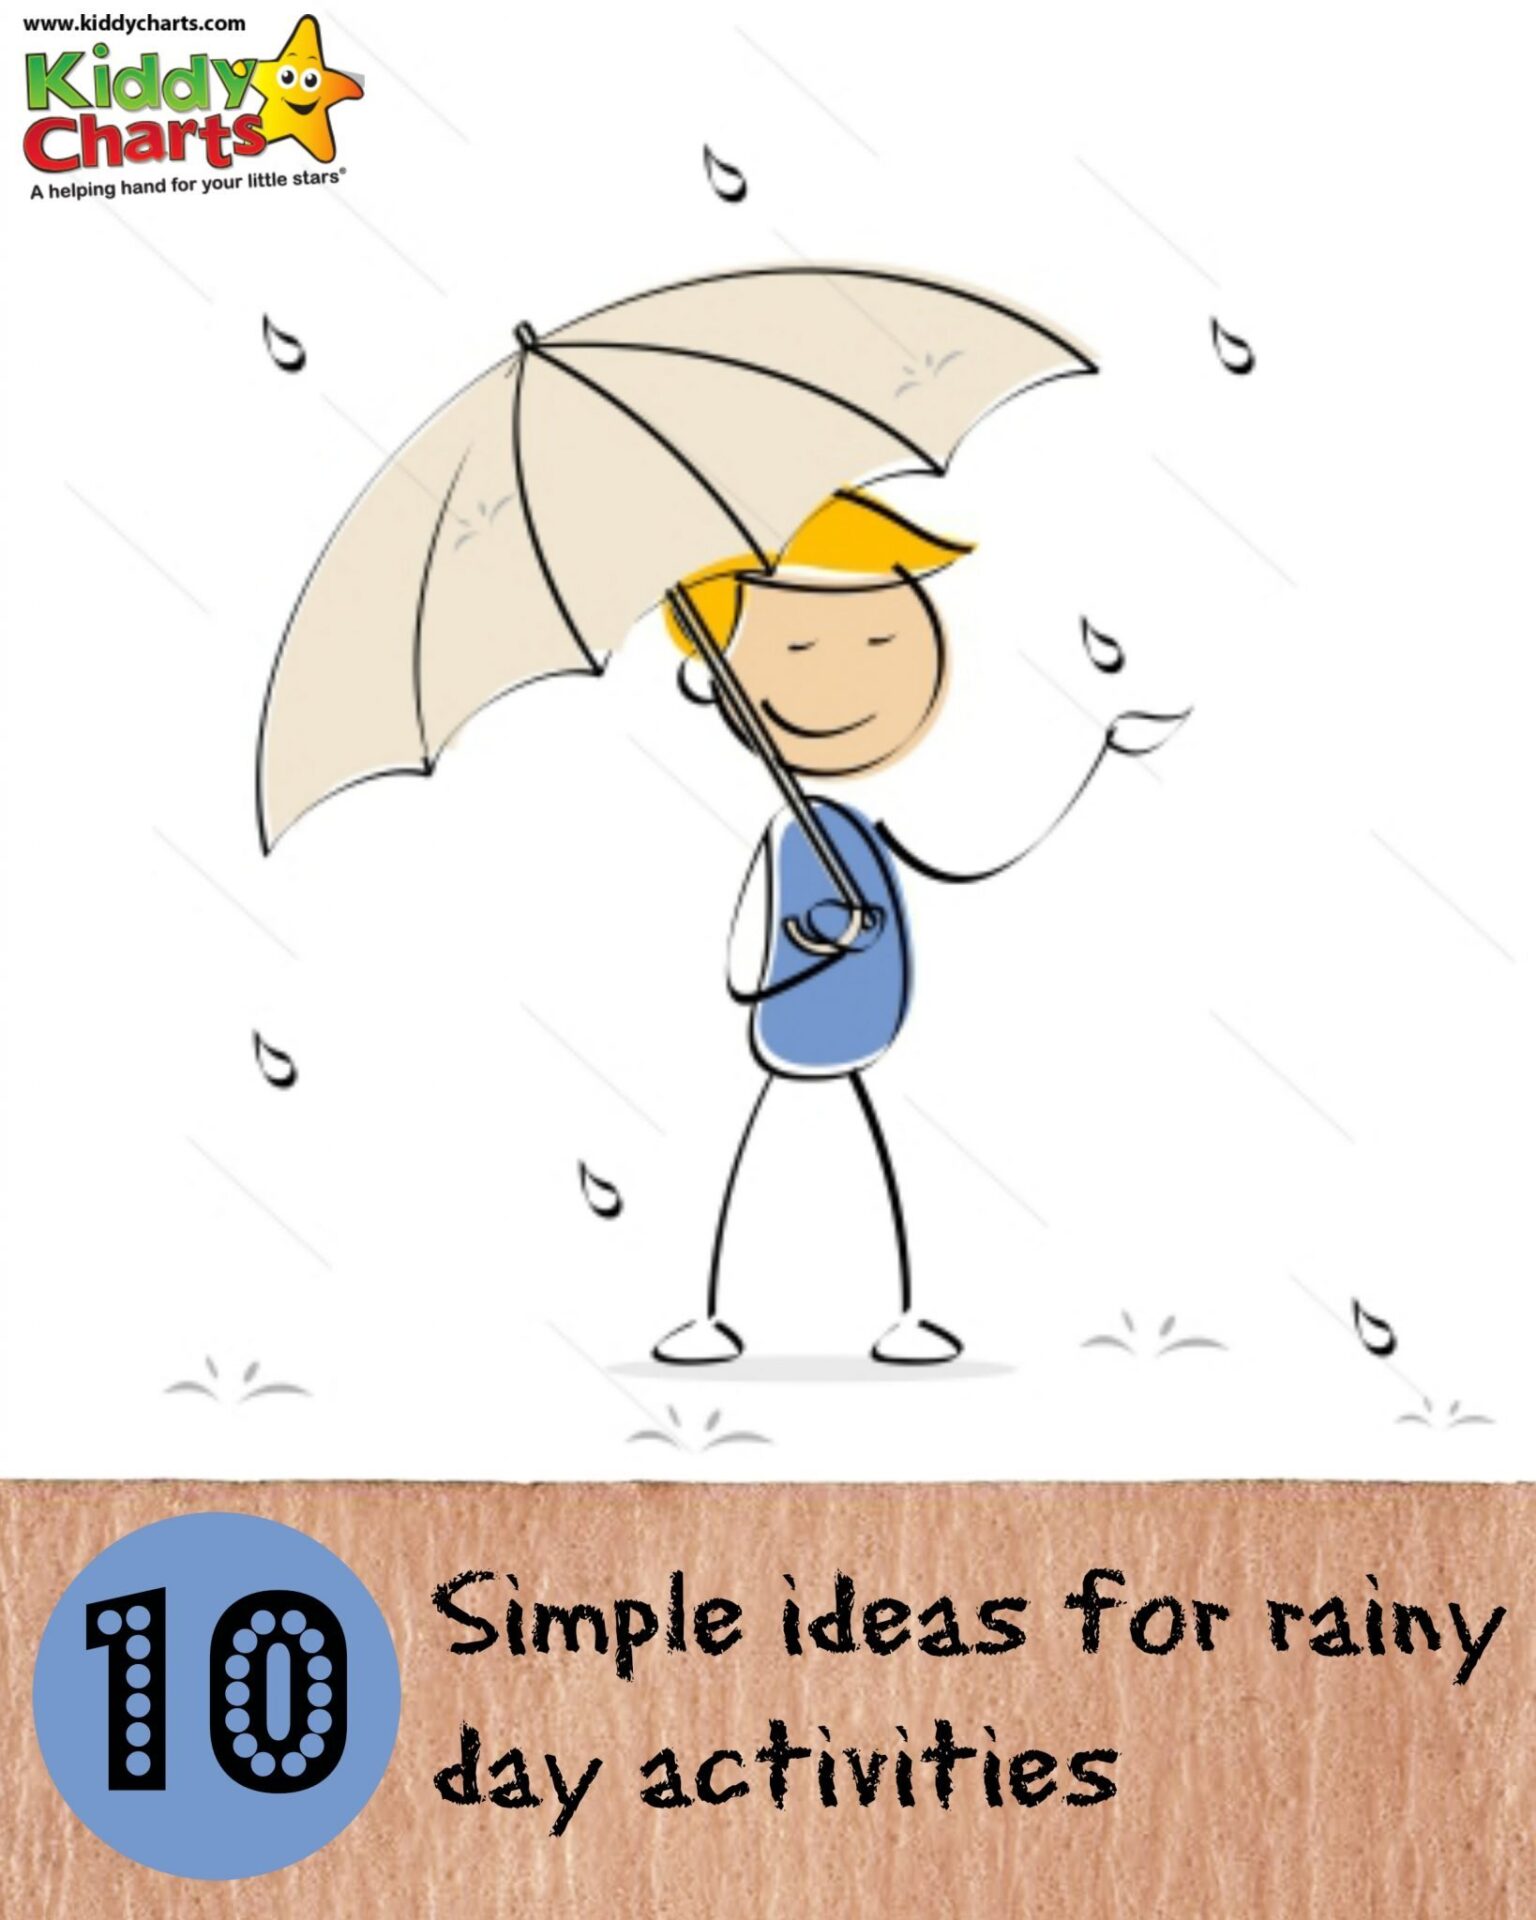 Sometimes we find it hard to come up with Rainy Day activities: here are some simple ideas to get you started, and some sites for inspiration. So GO!